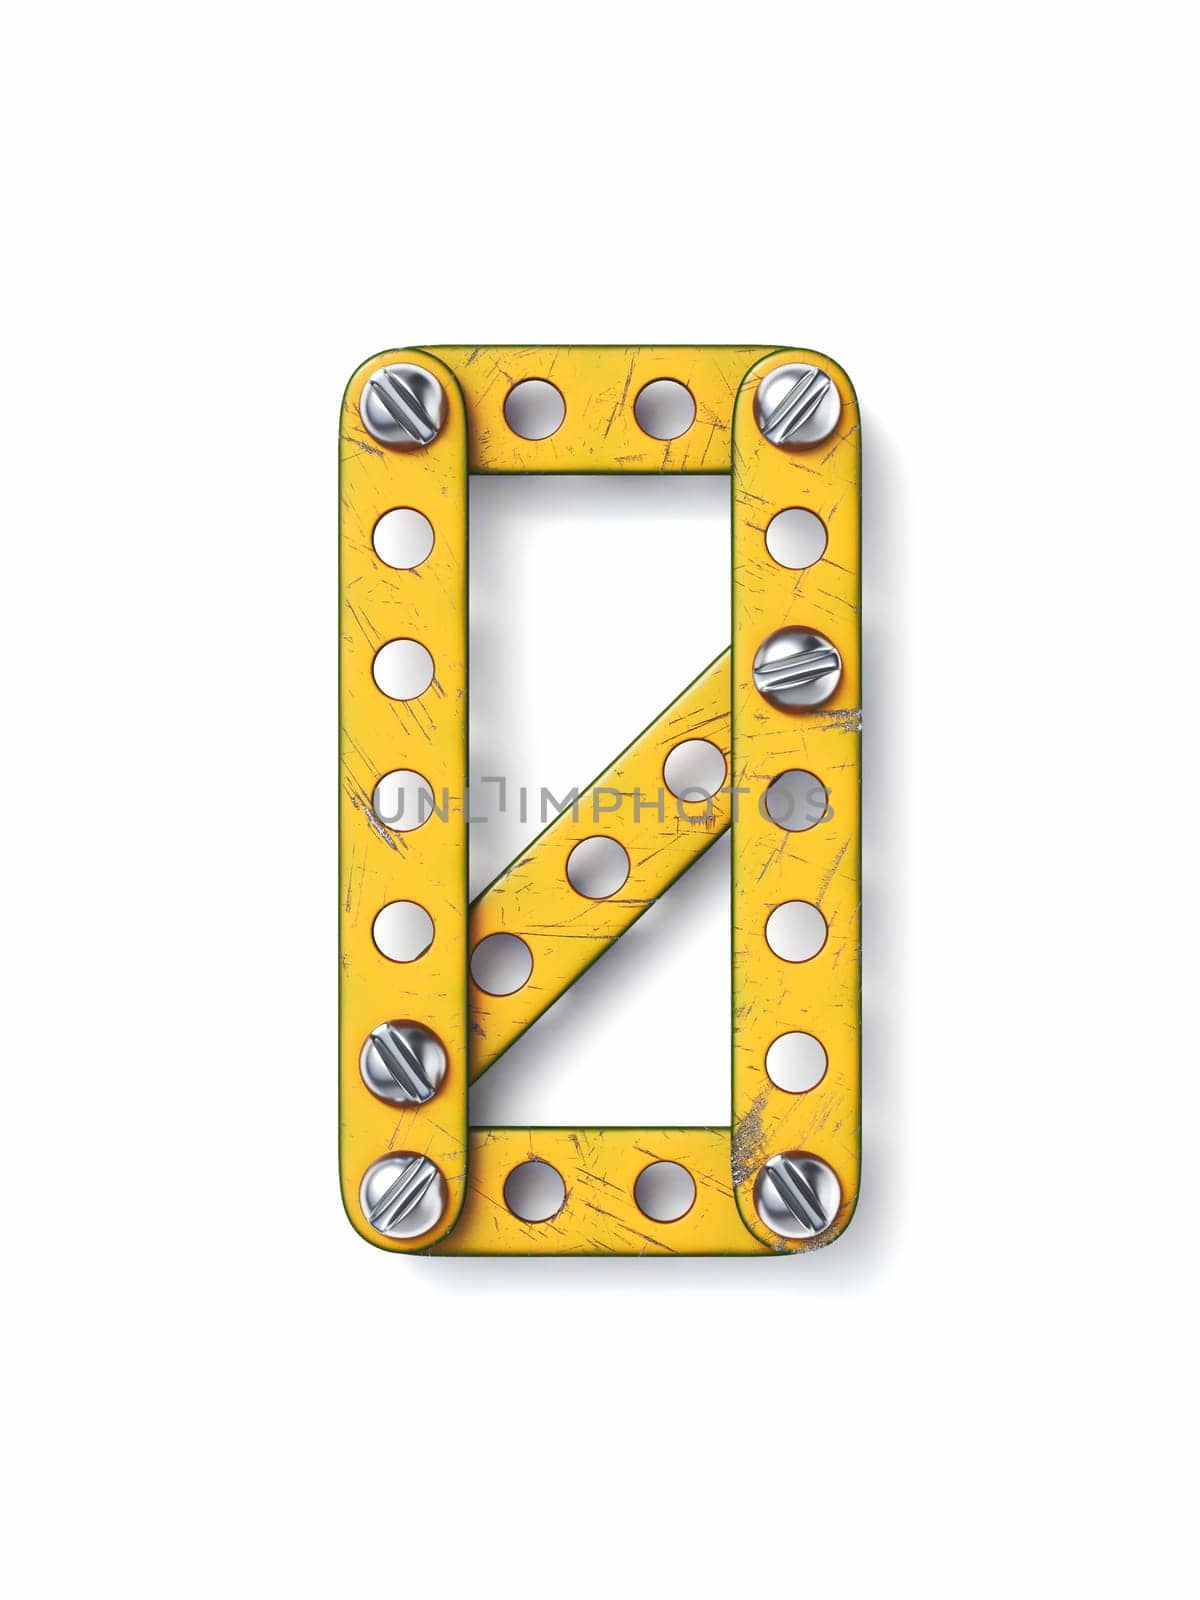 Aged yellow constructor font Number 0 ZERO 3D rendering illustration isolated on white background